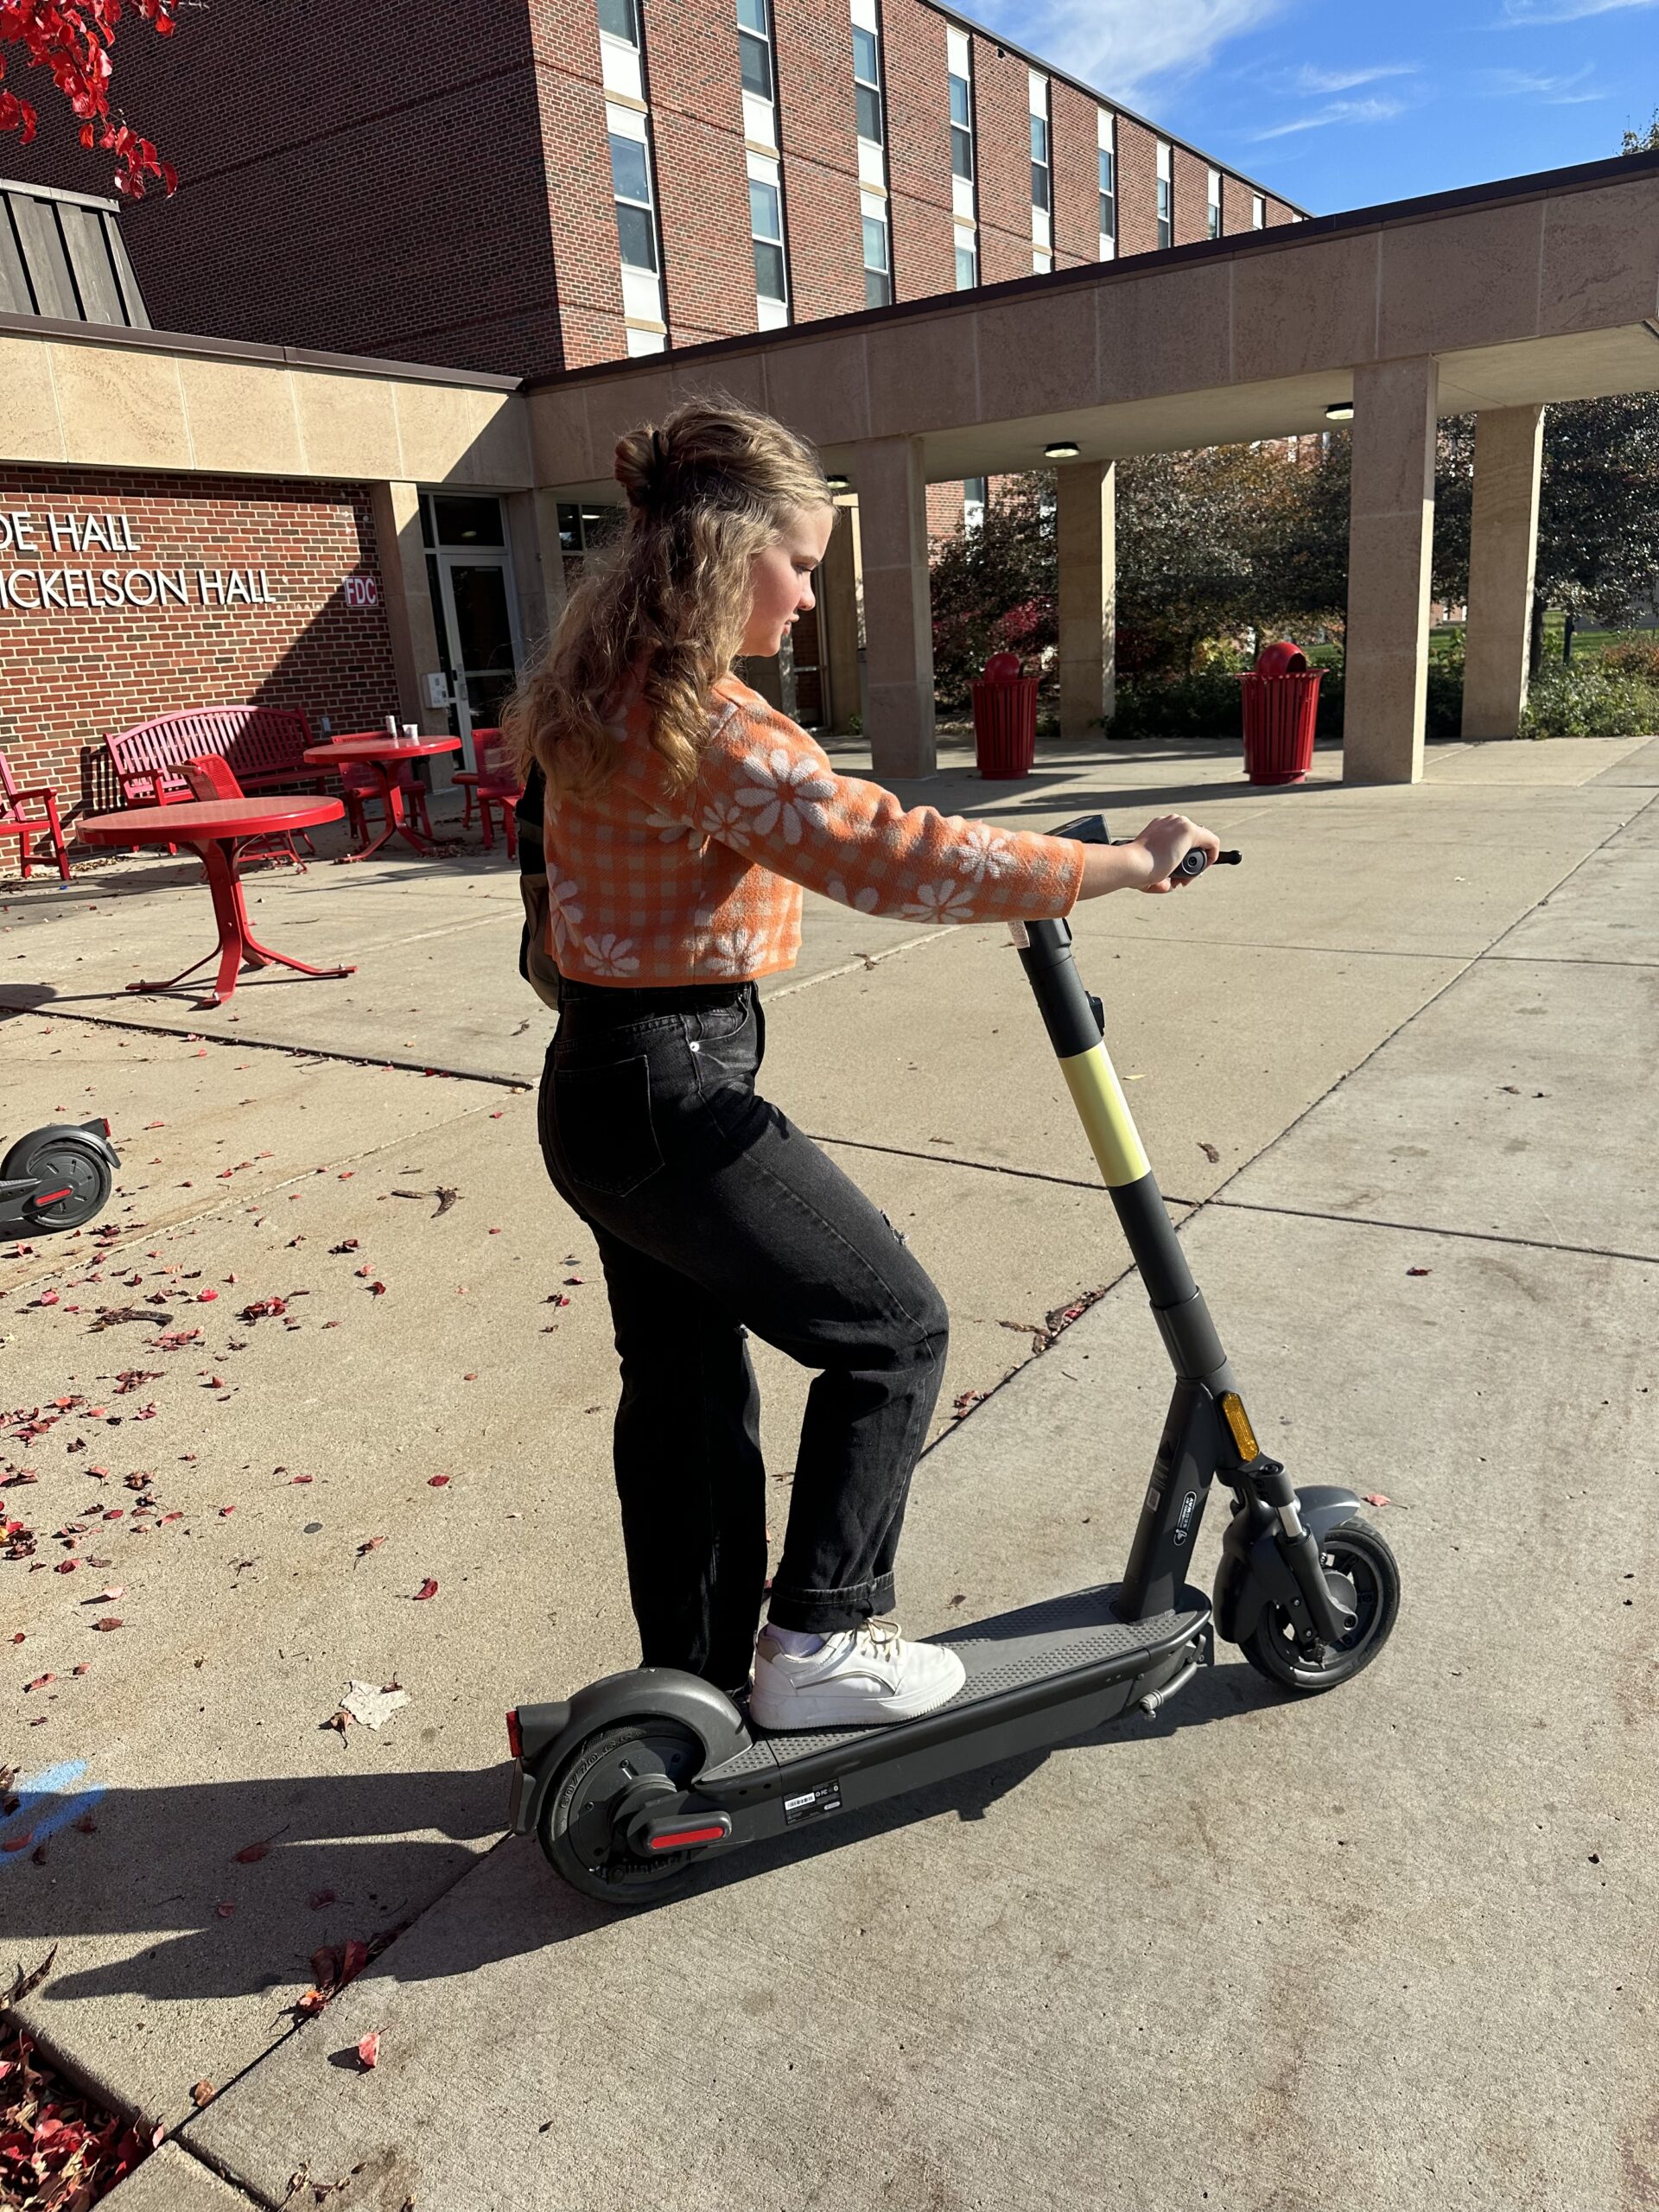 USD Gets a New Way of Getting Around